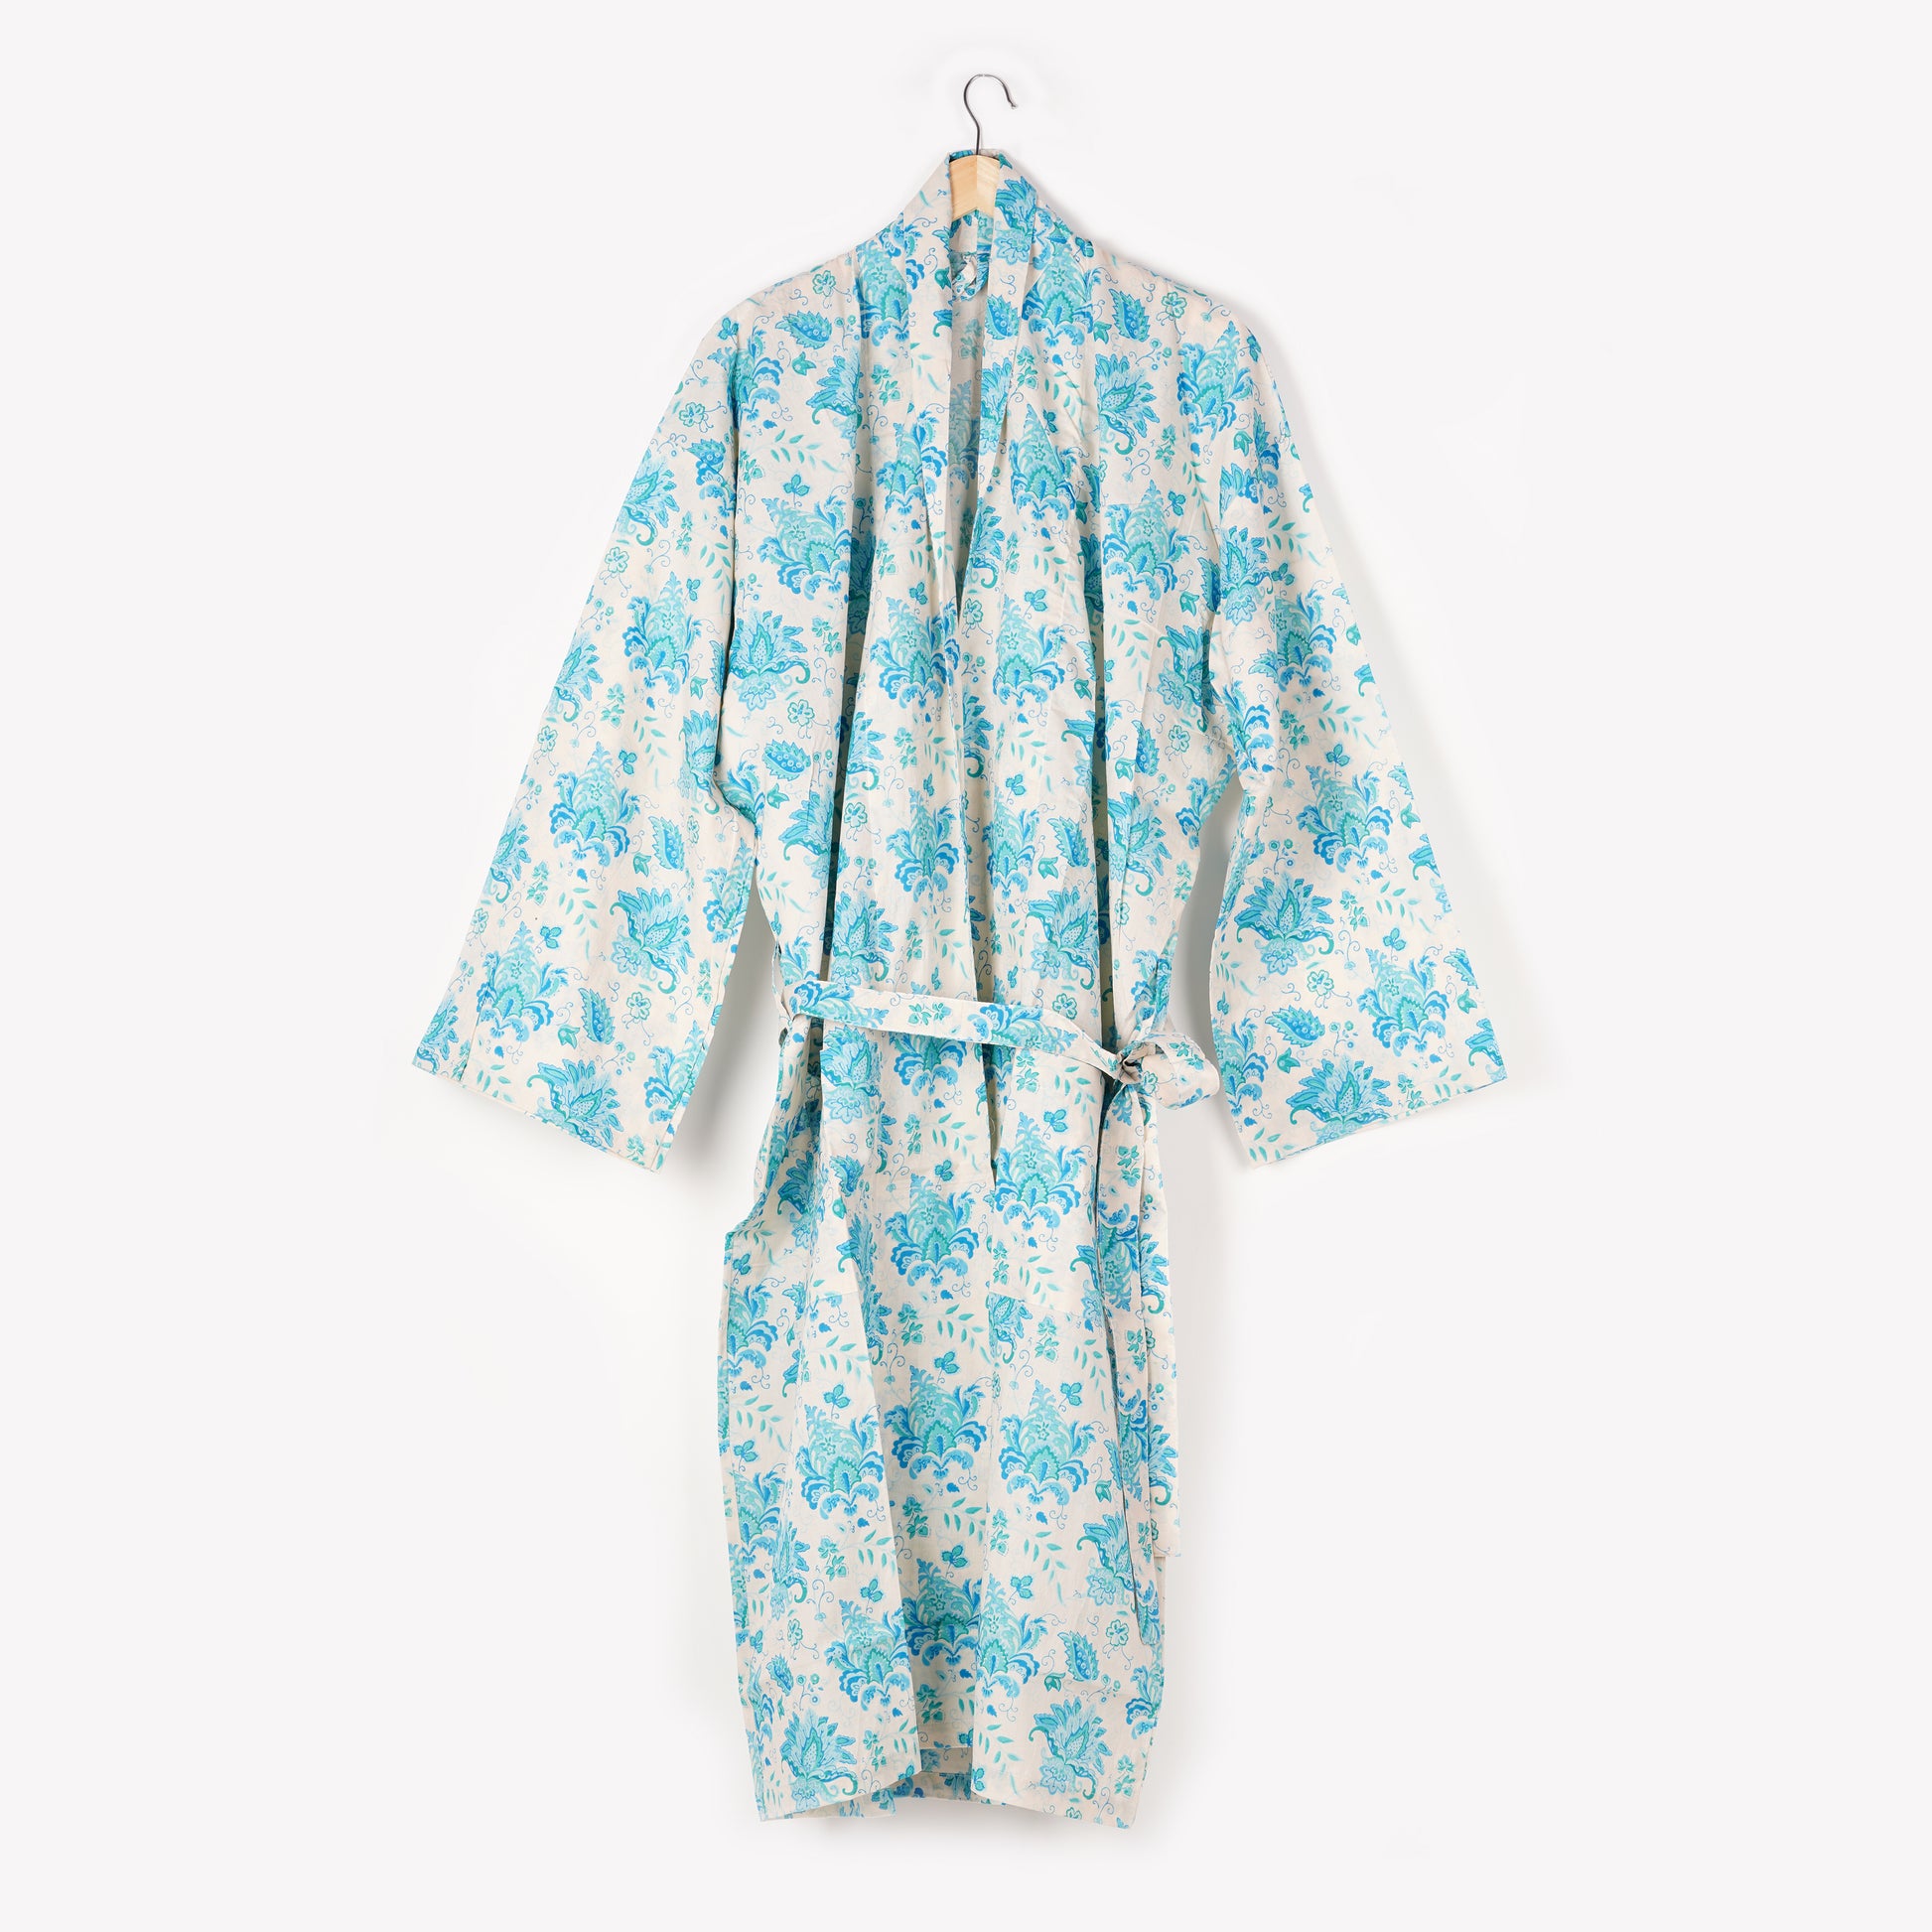 Kimono Bath Robes/ Night Suit -DS12 - The Teal Thread